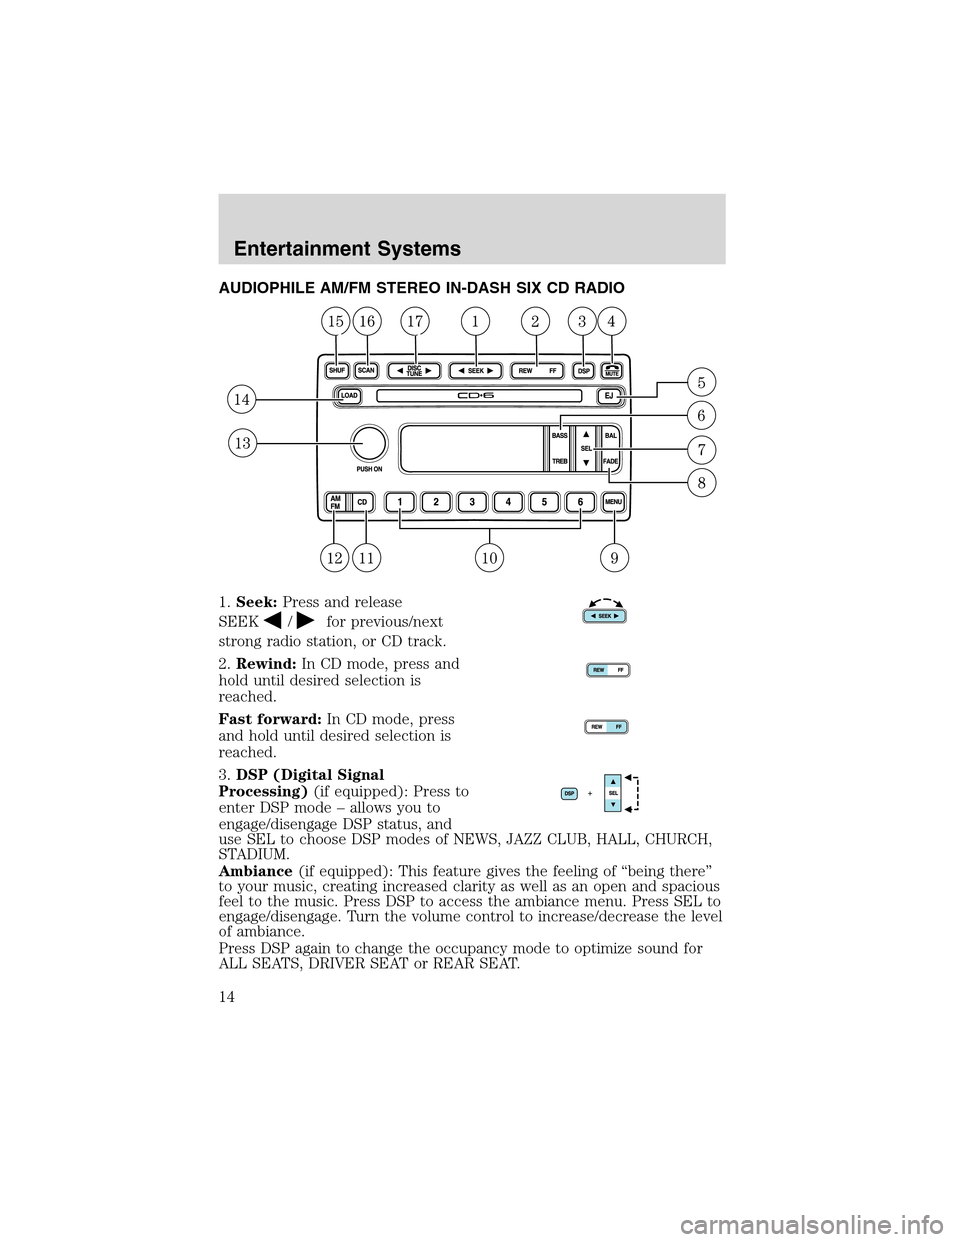 FORD THUNDERBIRD 2003 11.G User Guide AUDIOPHILE AM/FM STEREO IN-DASH SIX CD RADIO
1.Seek:Press and release
SEEK
/for previous/next
strong radio station, or CD track.
2.Rewind:In CD mode, press and
hold until desired selection is
reached.